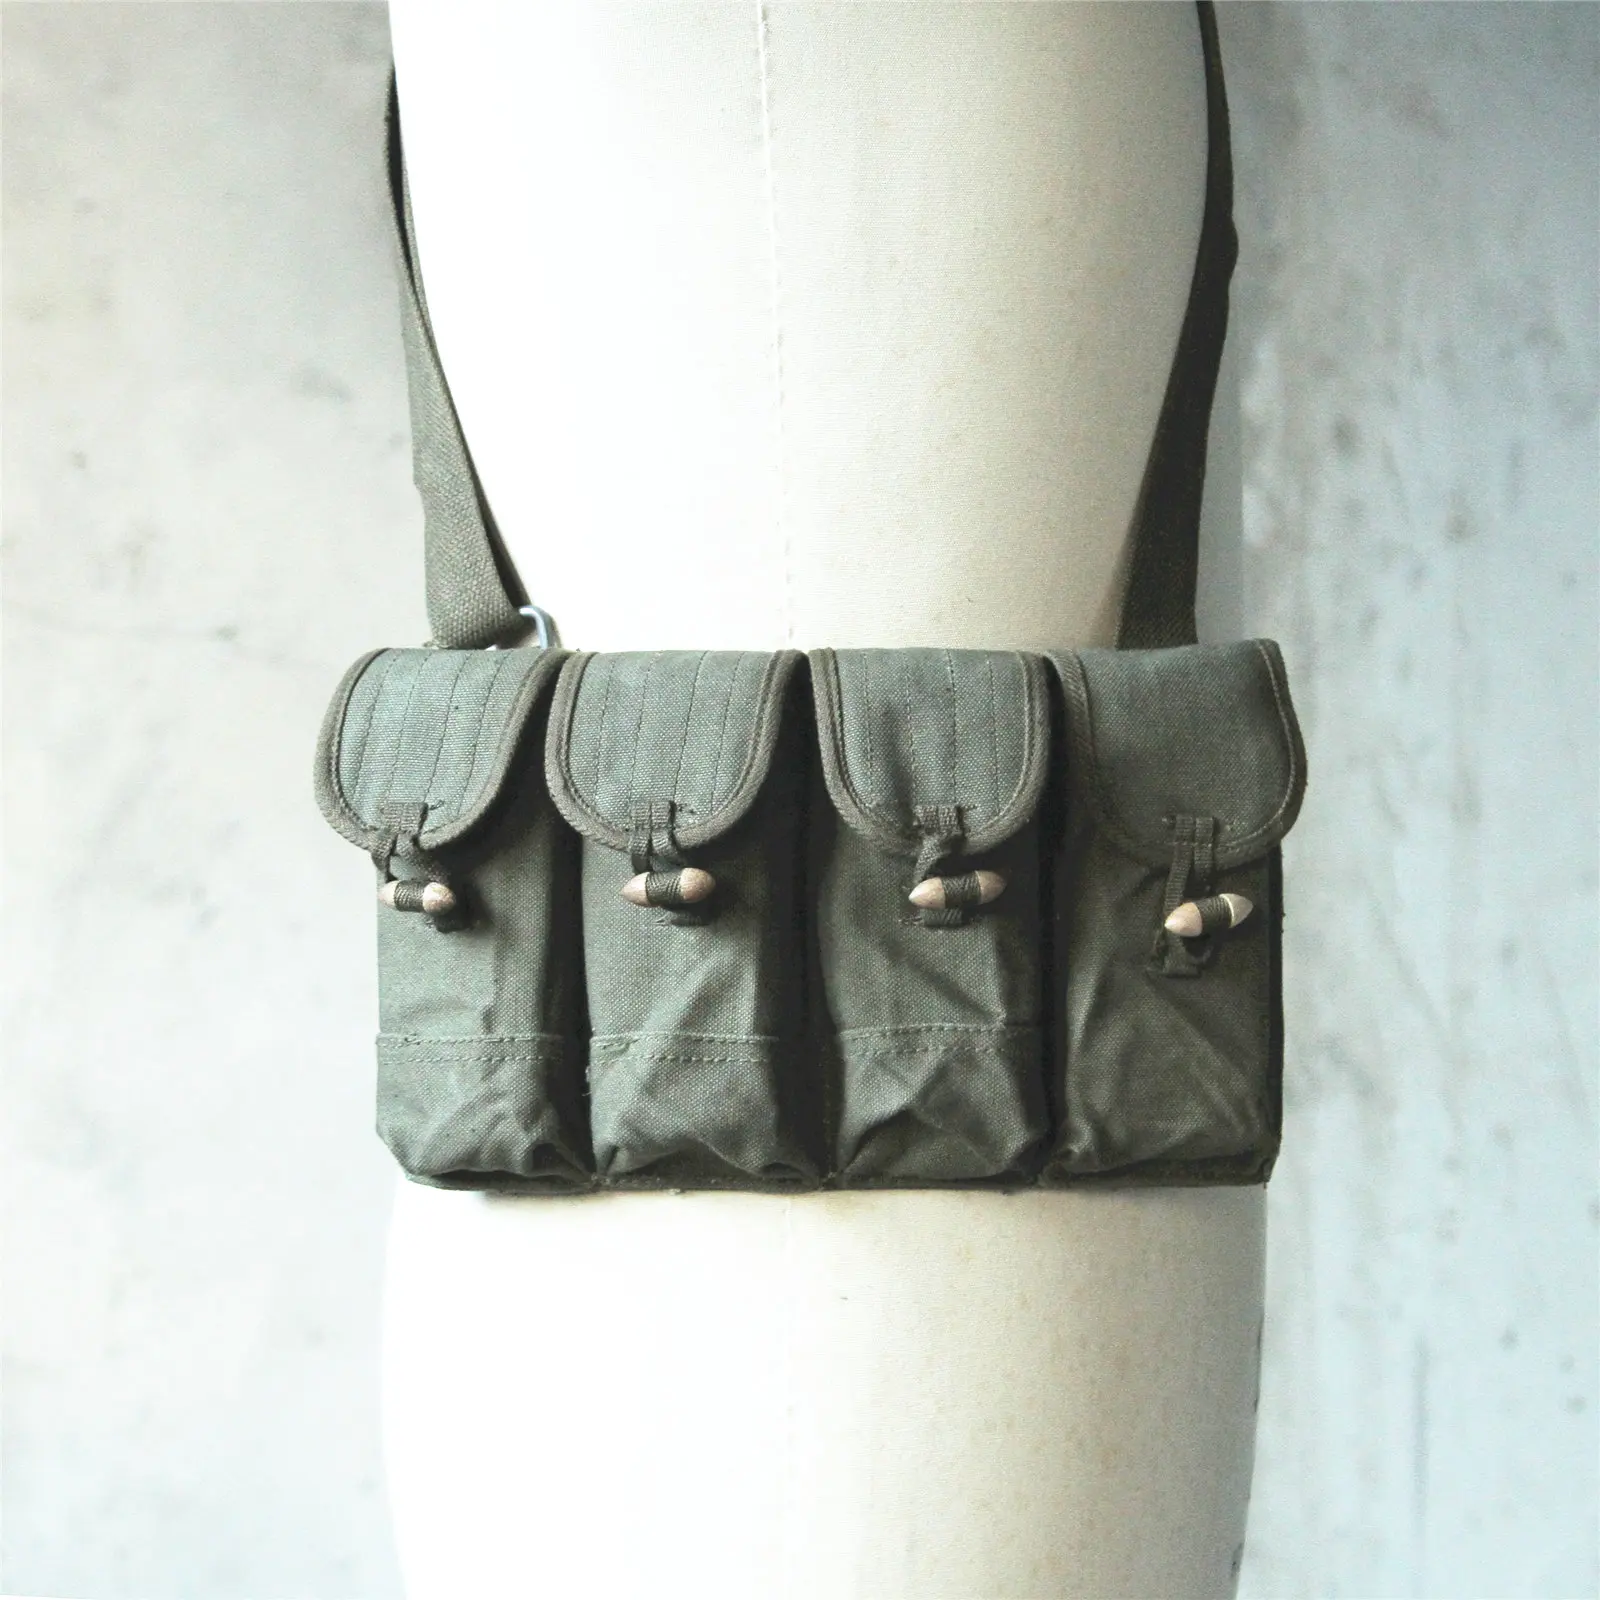 

Chinese Military Surplus Type 79 SMG Magazine Pouch 7.62*25mm 20 rounds Shouder Bag Canvas Chest Rig 4-pockets Vietnam War Scout